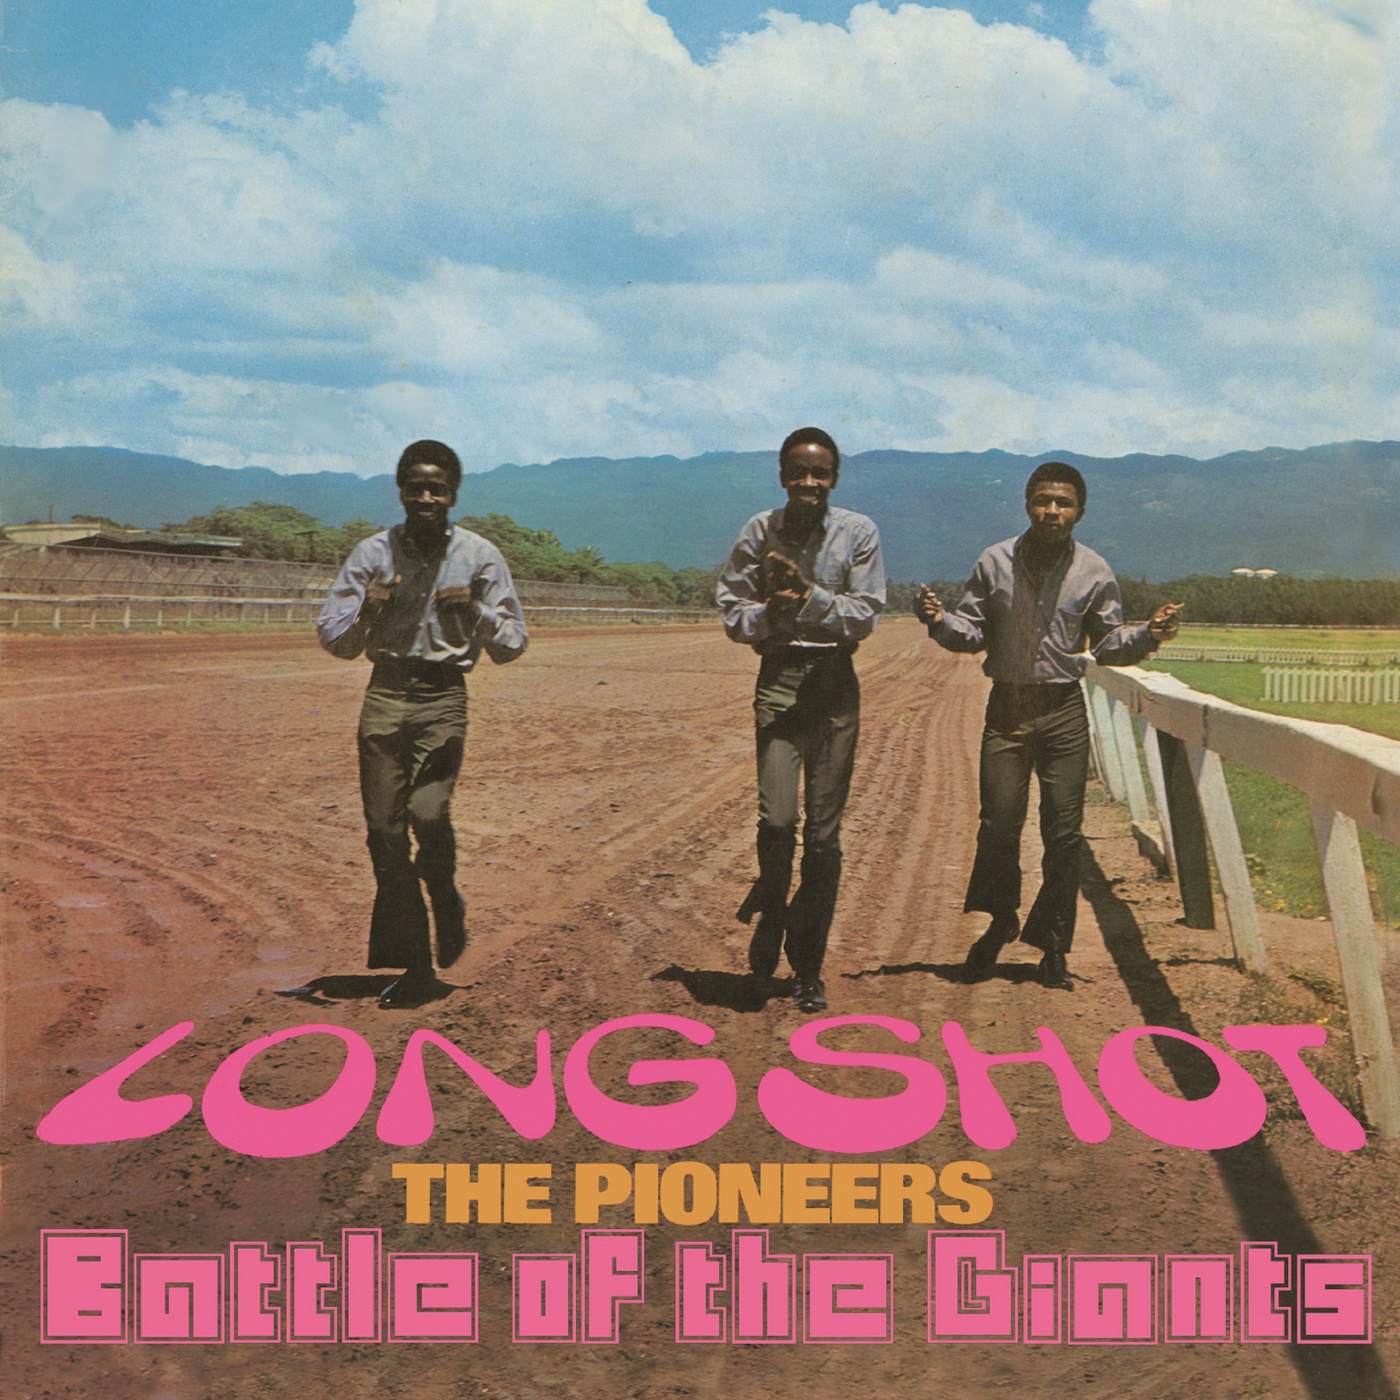 The Pioneers LONG SHOT / BATTLE OF THE GIANTS CD